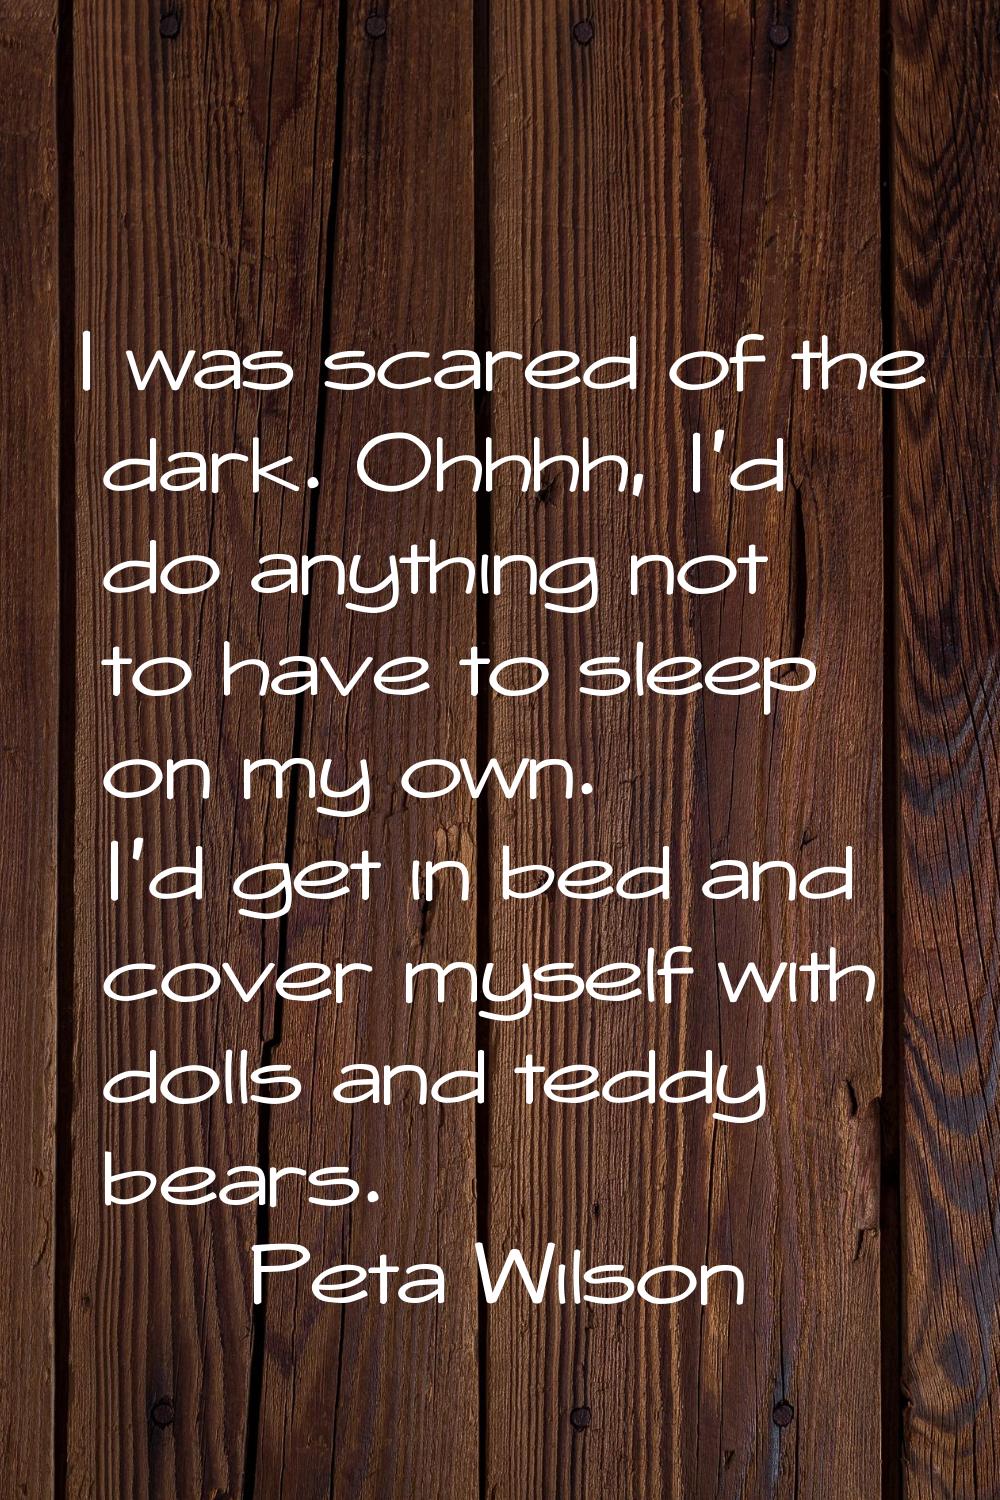 I was scared of the dark. Ohhhh, I'd do anything not to have to sleep on my own. I'd get in bed and